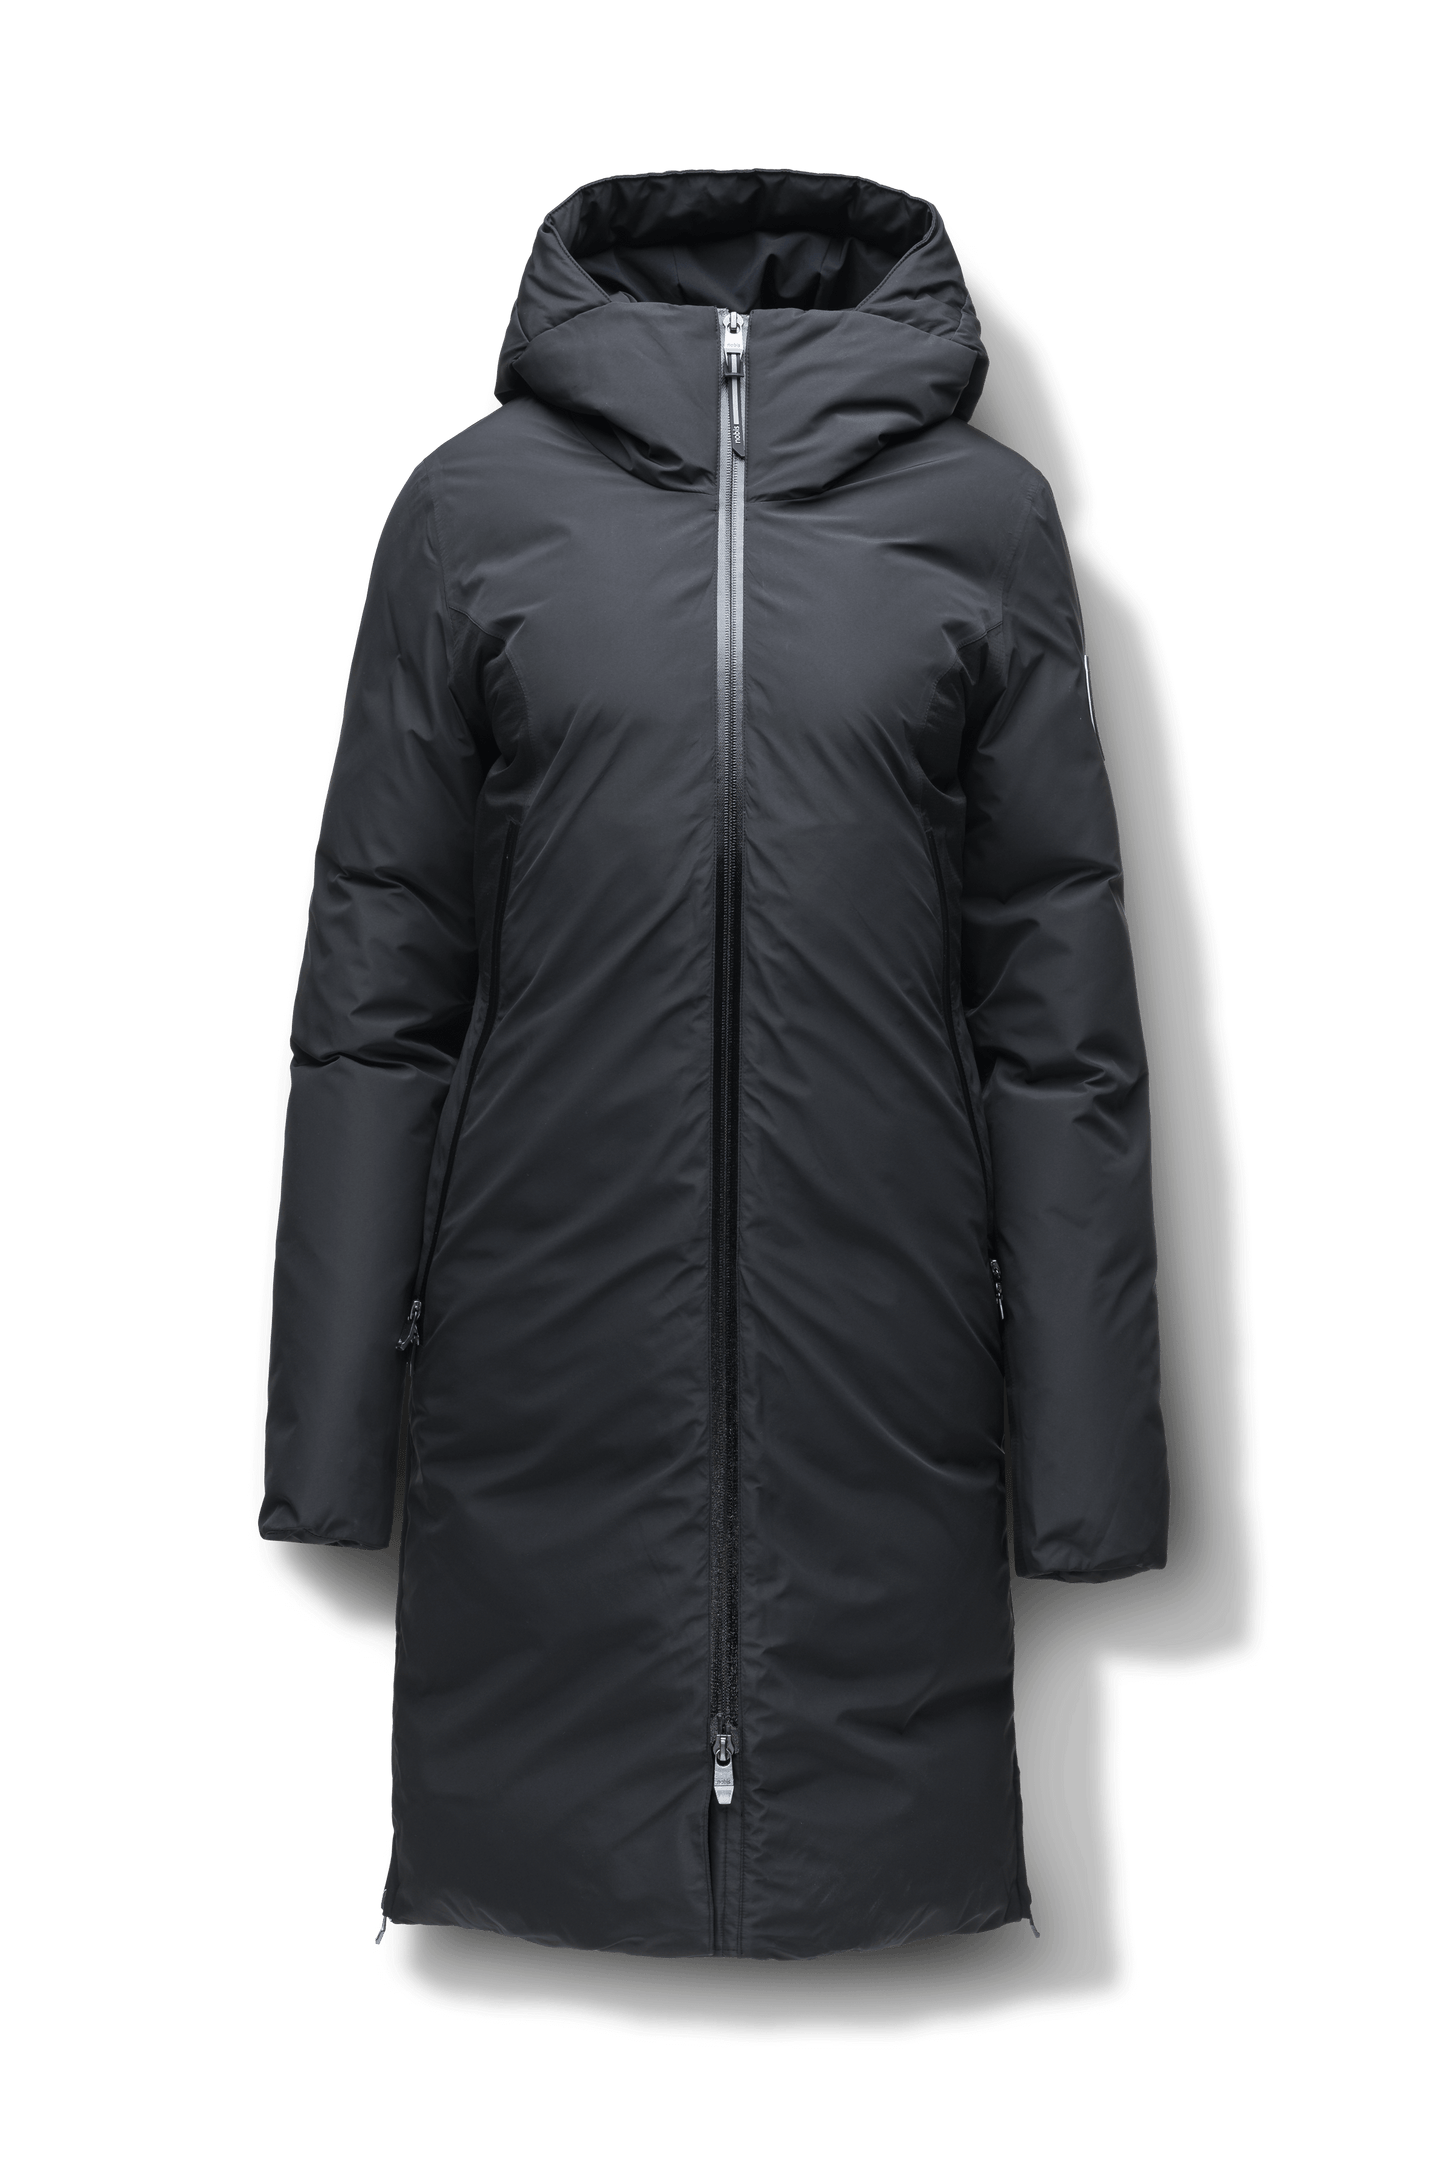 Inara Women's Performance Parka in knee length, premium 3-ply micro denier and stretch ripstop fabrication with DWR coating, Premium Canadian White Duck Down insulation, non-removable down-filled hood, centre front two-way zipper, large vertical zipper pockets along waist, zipper vents along bottom side hem, in Black